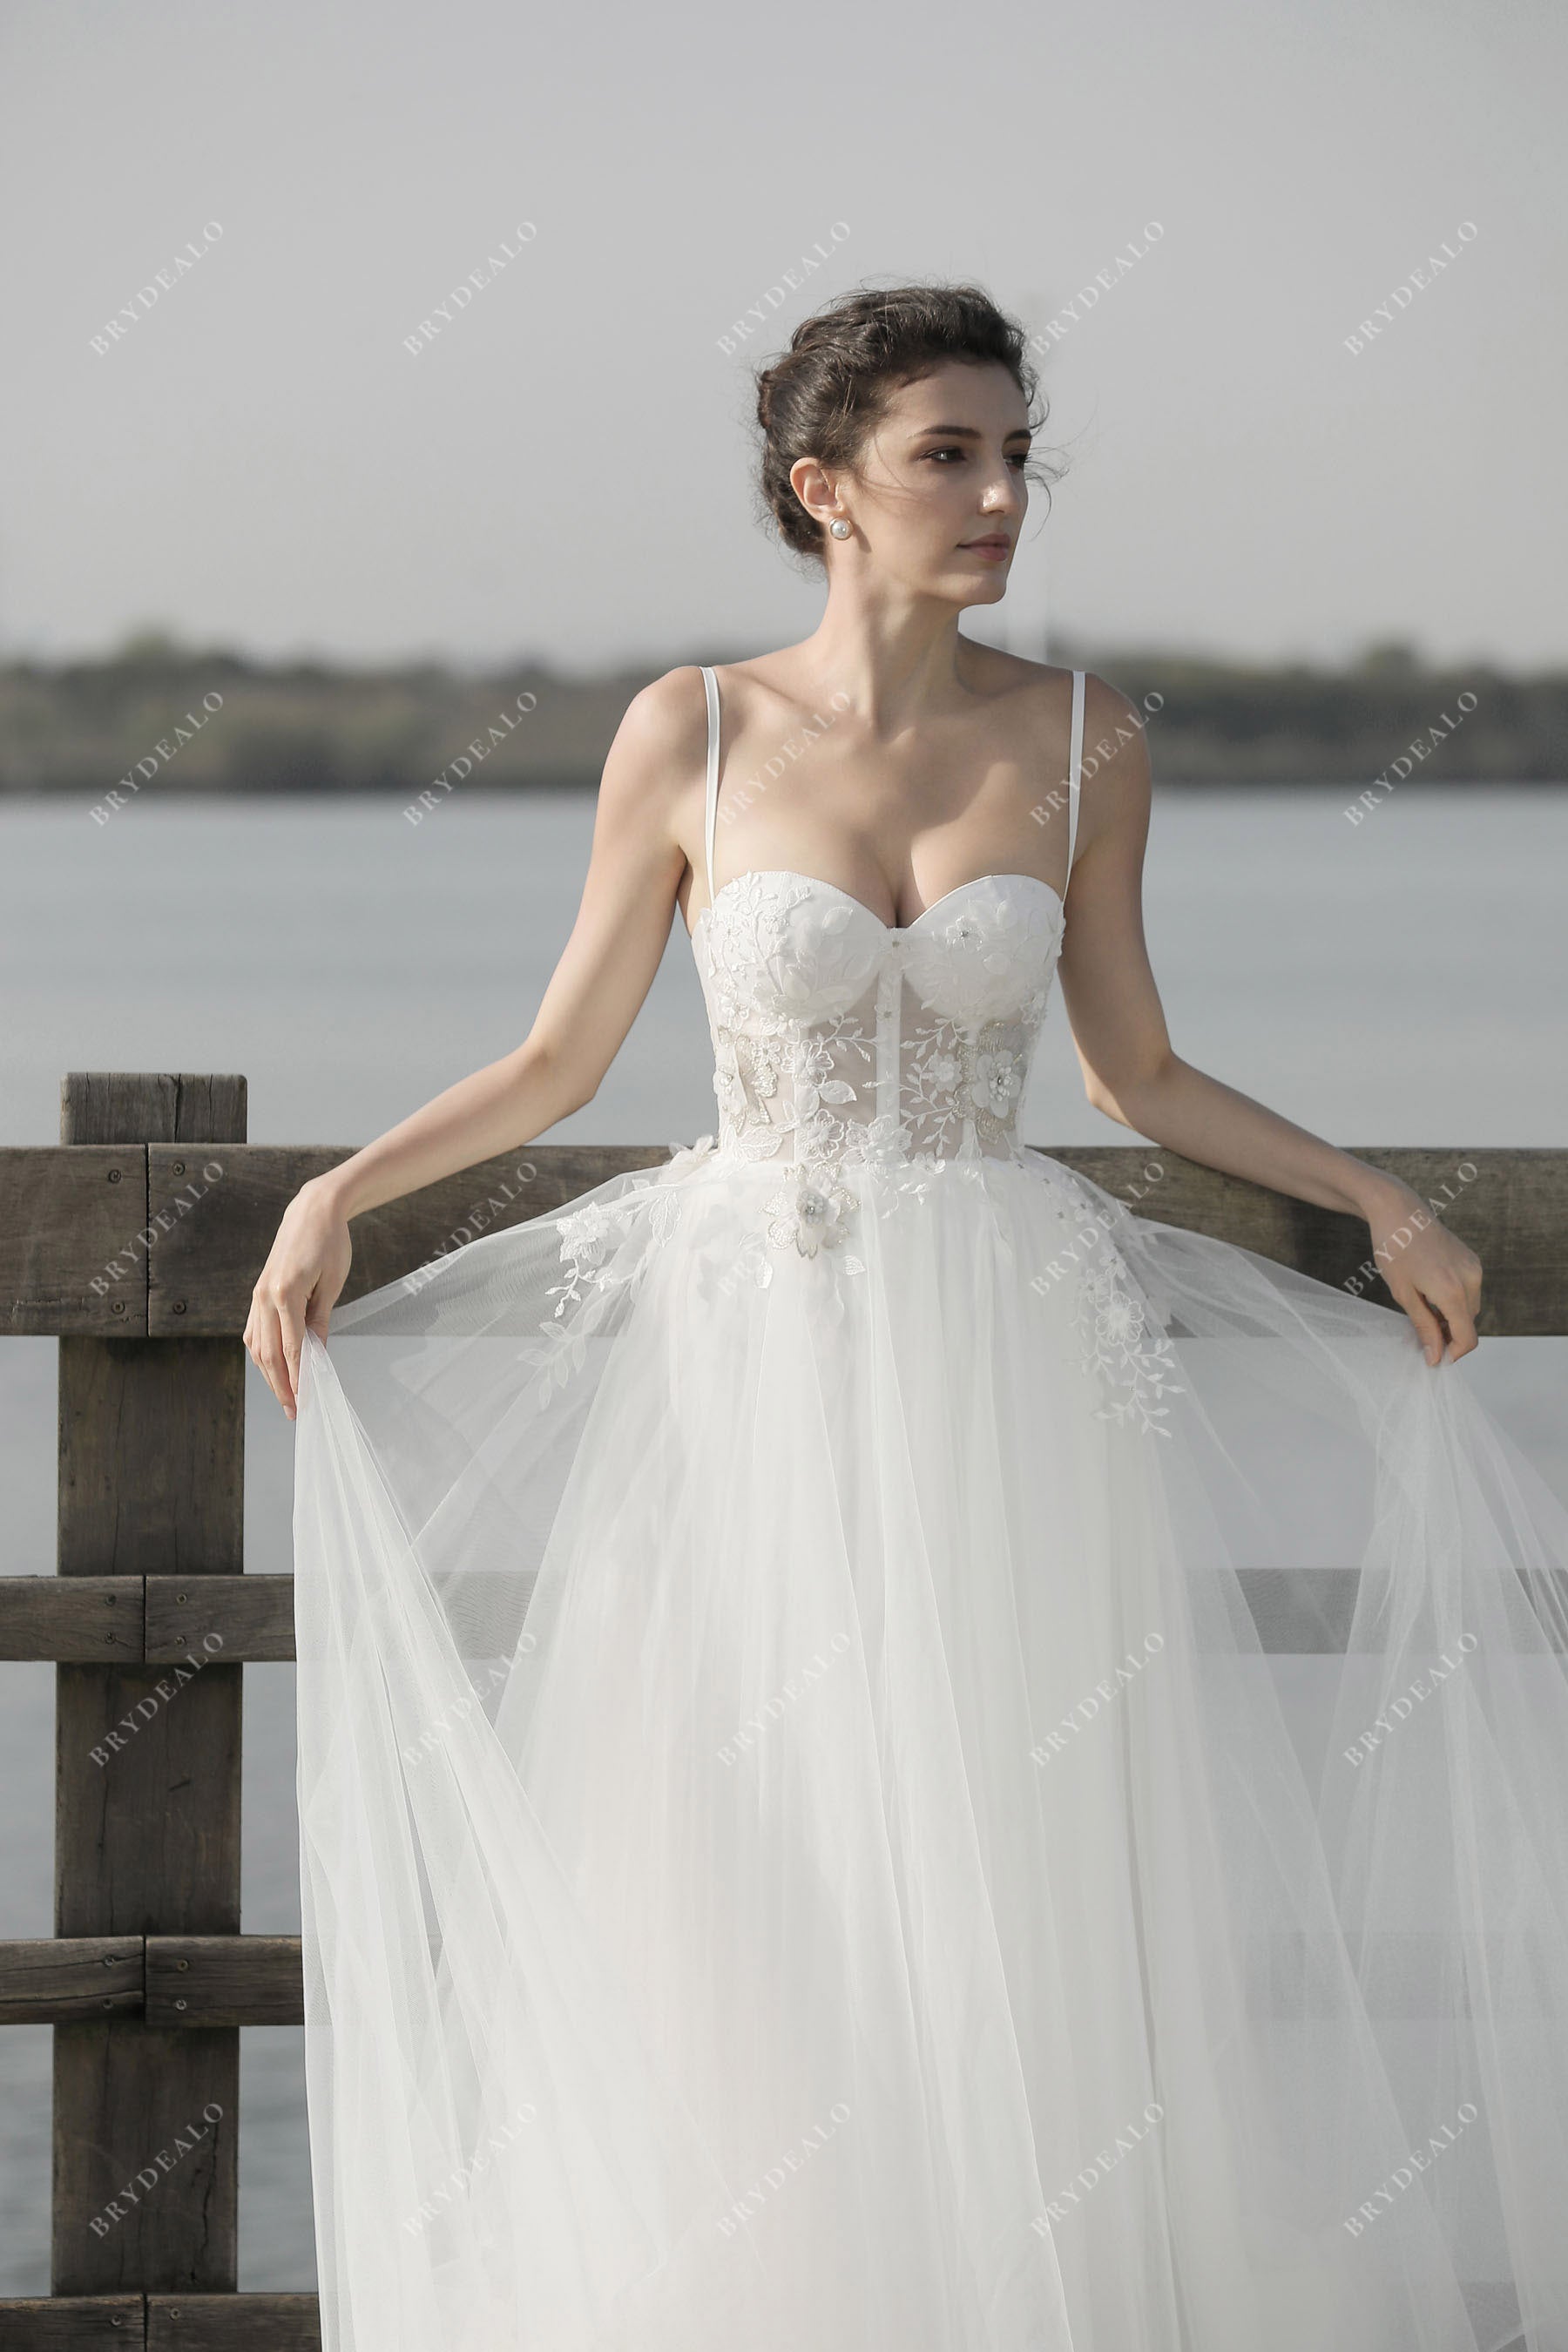 Ball Gown with Lace Corset Bodice